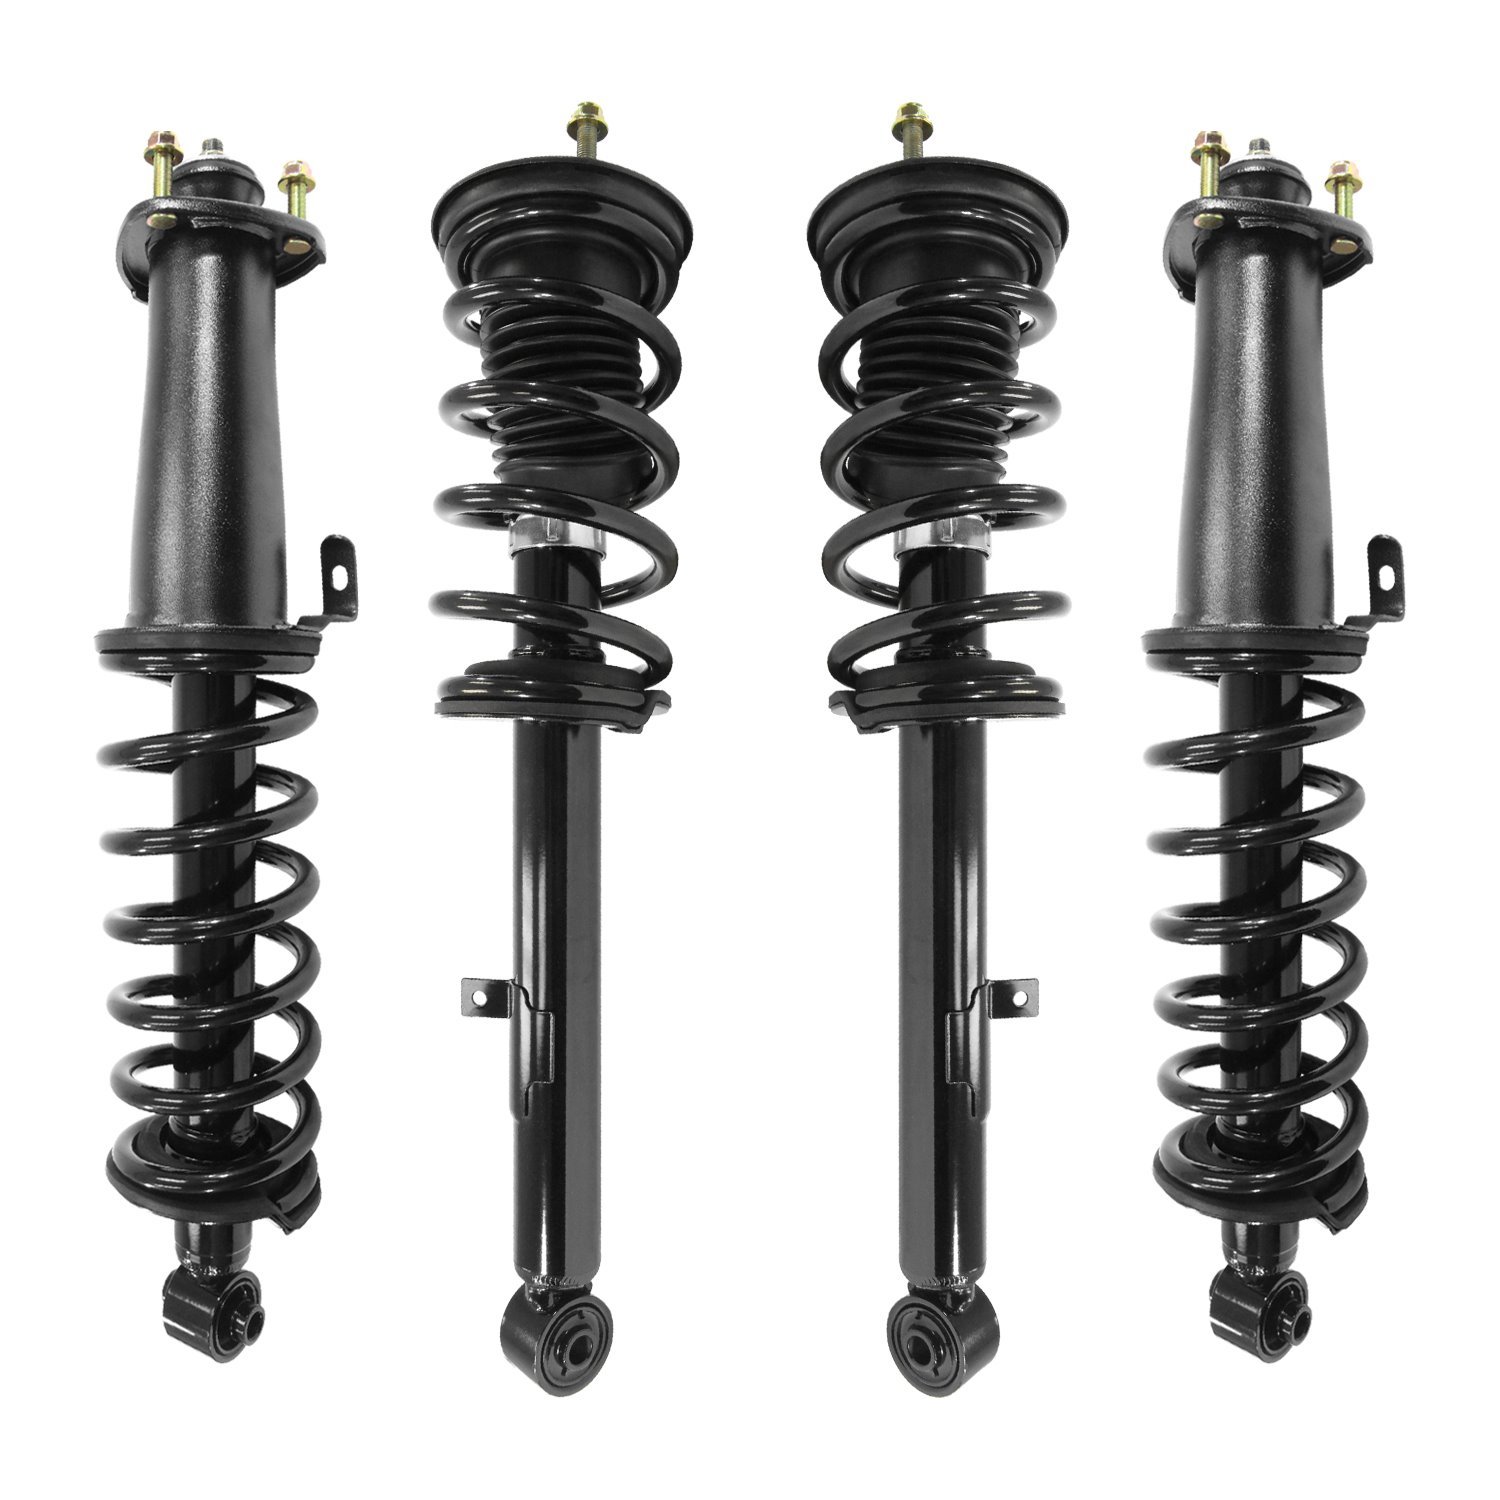 4-11837-15260-001 Front & Rear Suspension Strut & Coil Spring Assembly Kit Fits Select Lexus IS250, Lexus IS350